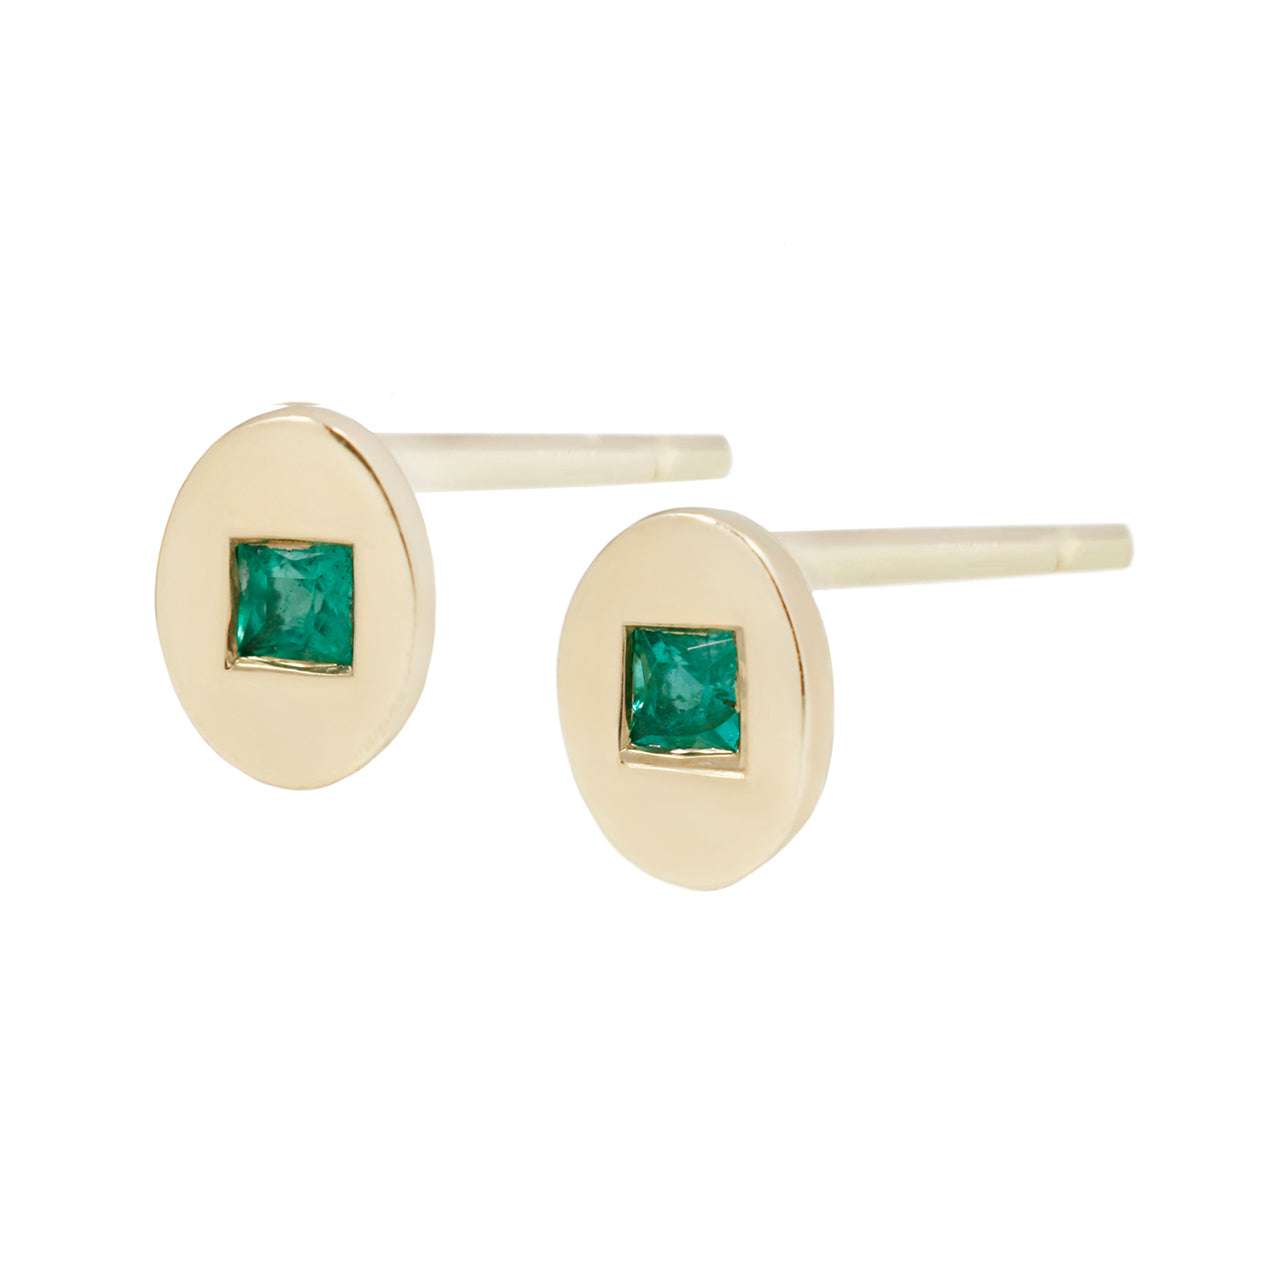 Oval studs with emeralds